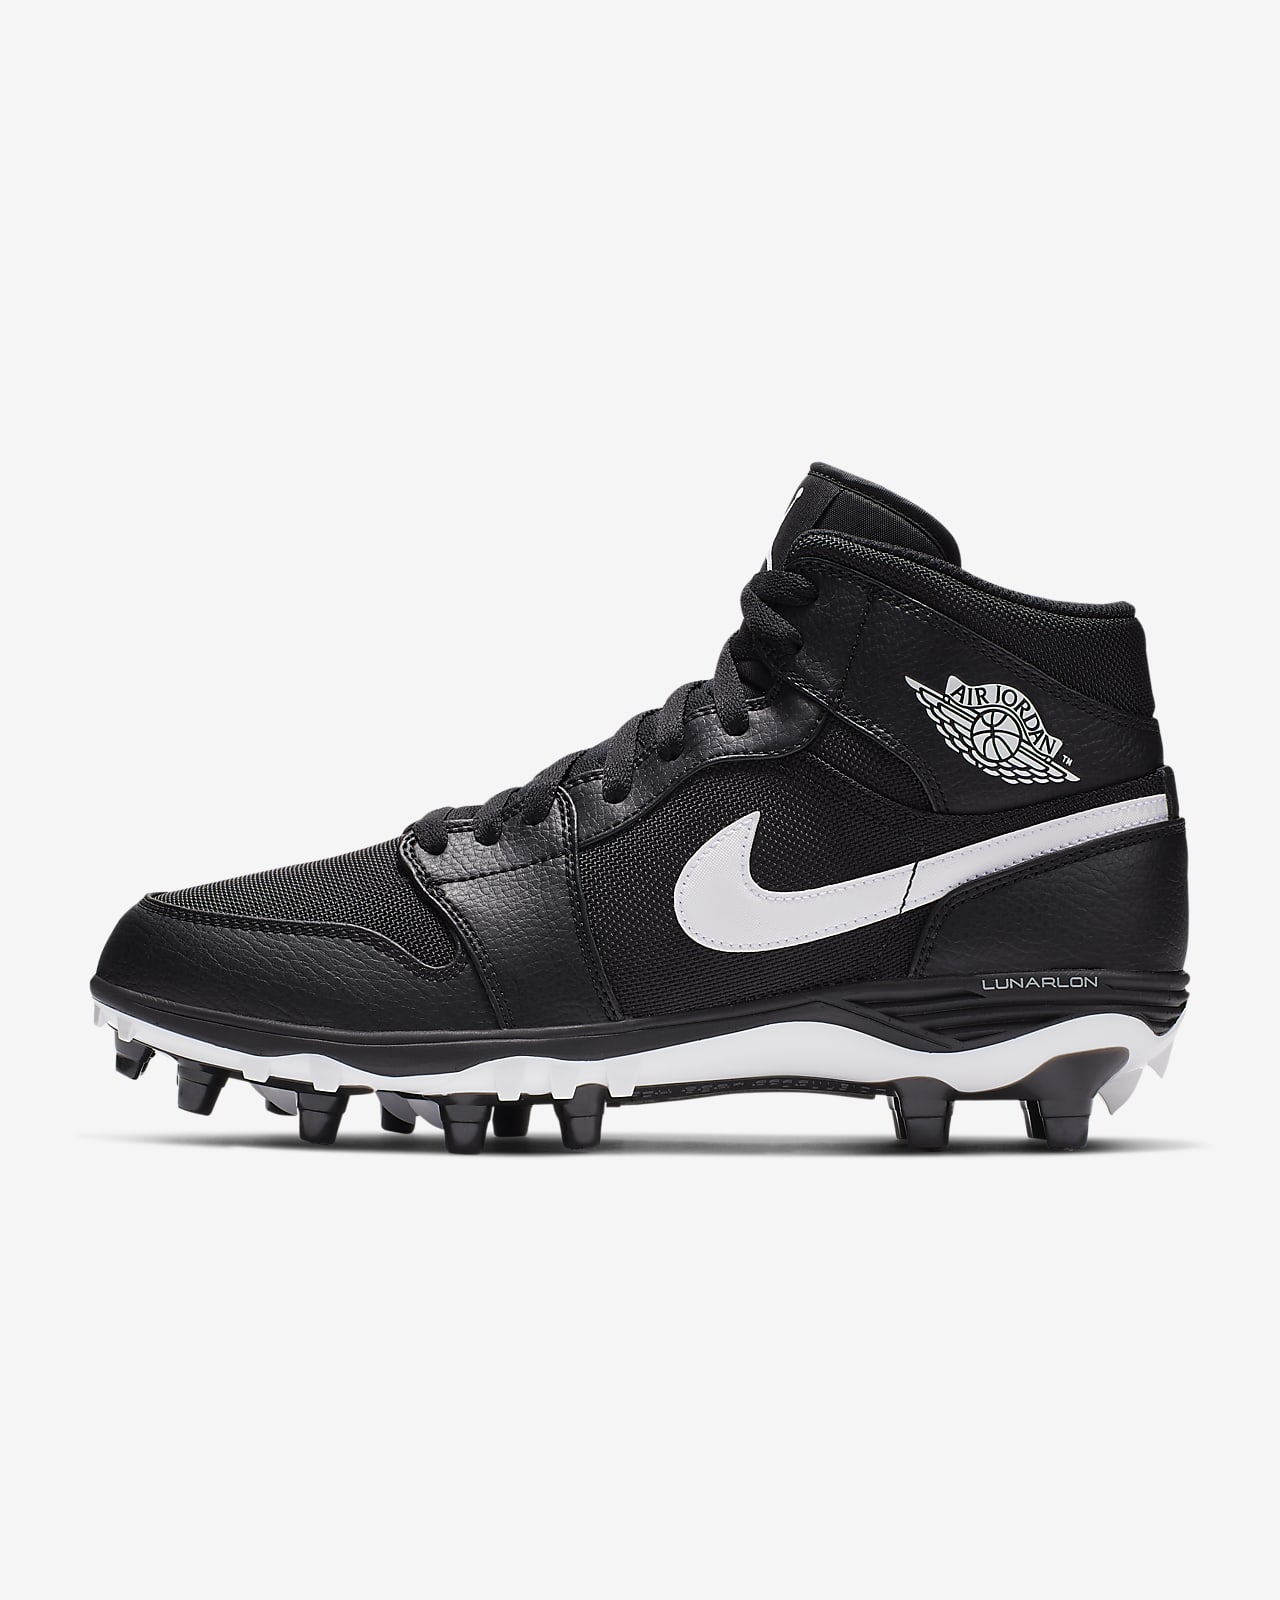 cleats for football near me